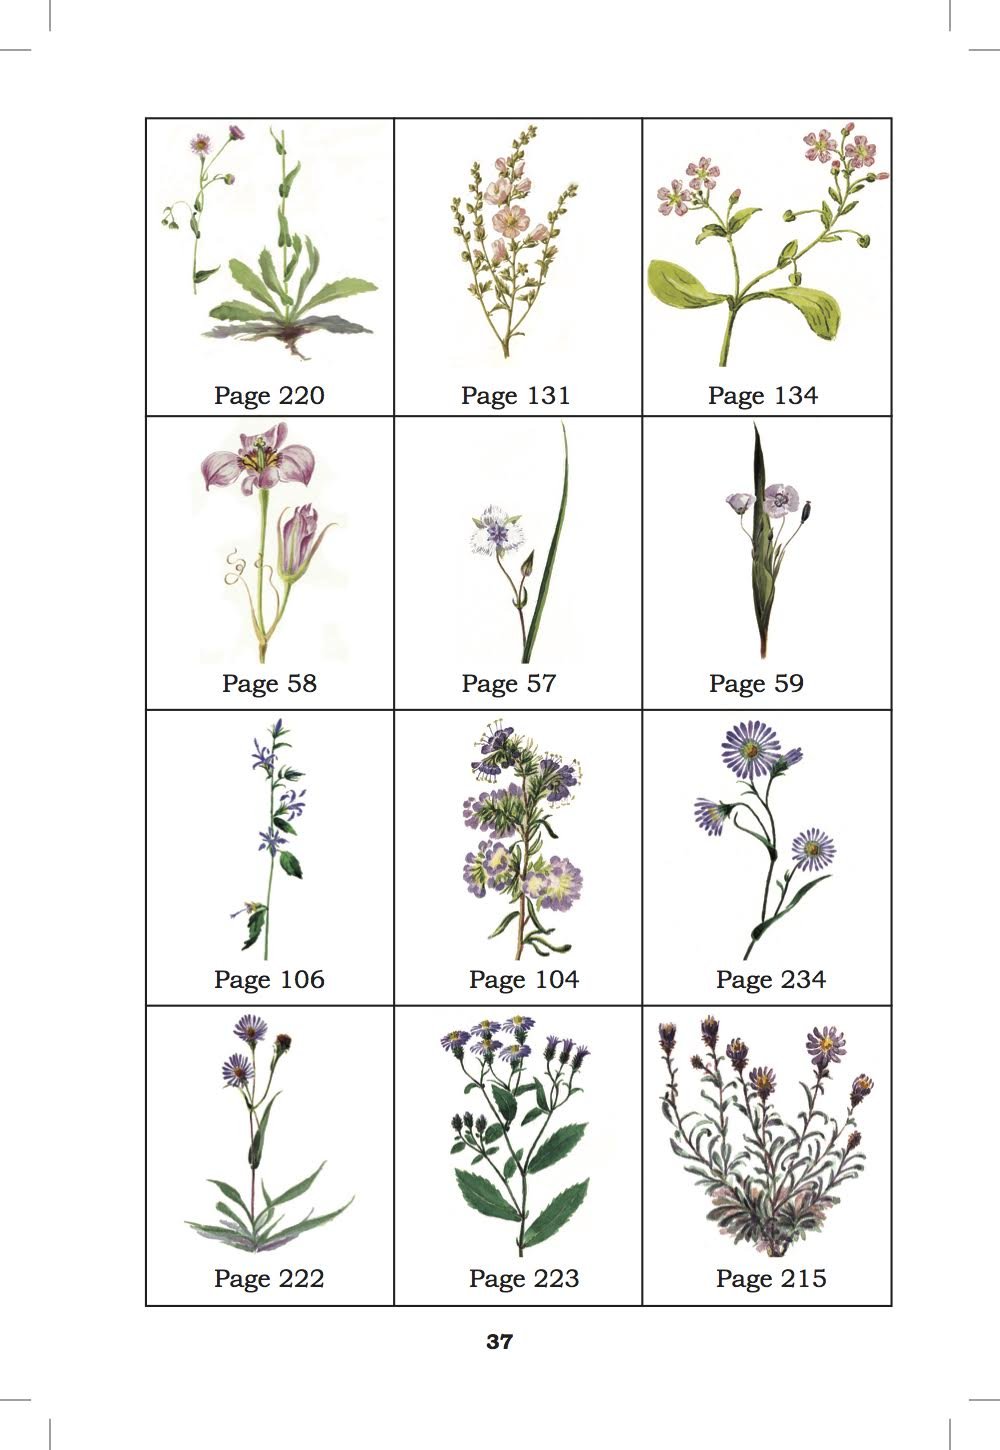 Mount Shasta Wildflowers: A Field Guide Featuring the Paintings of Edward Stuhl Spiral-bound – Unabridged, January 1, 2015